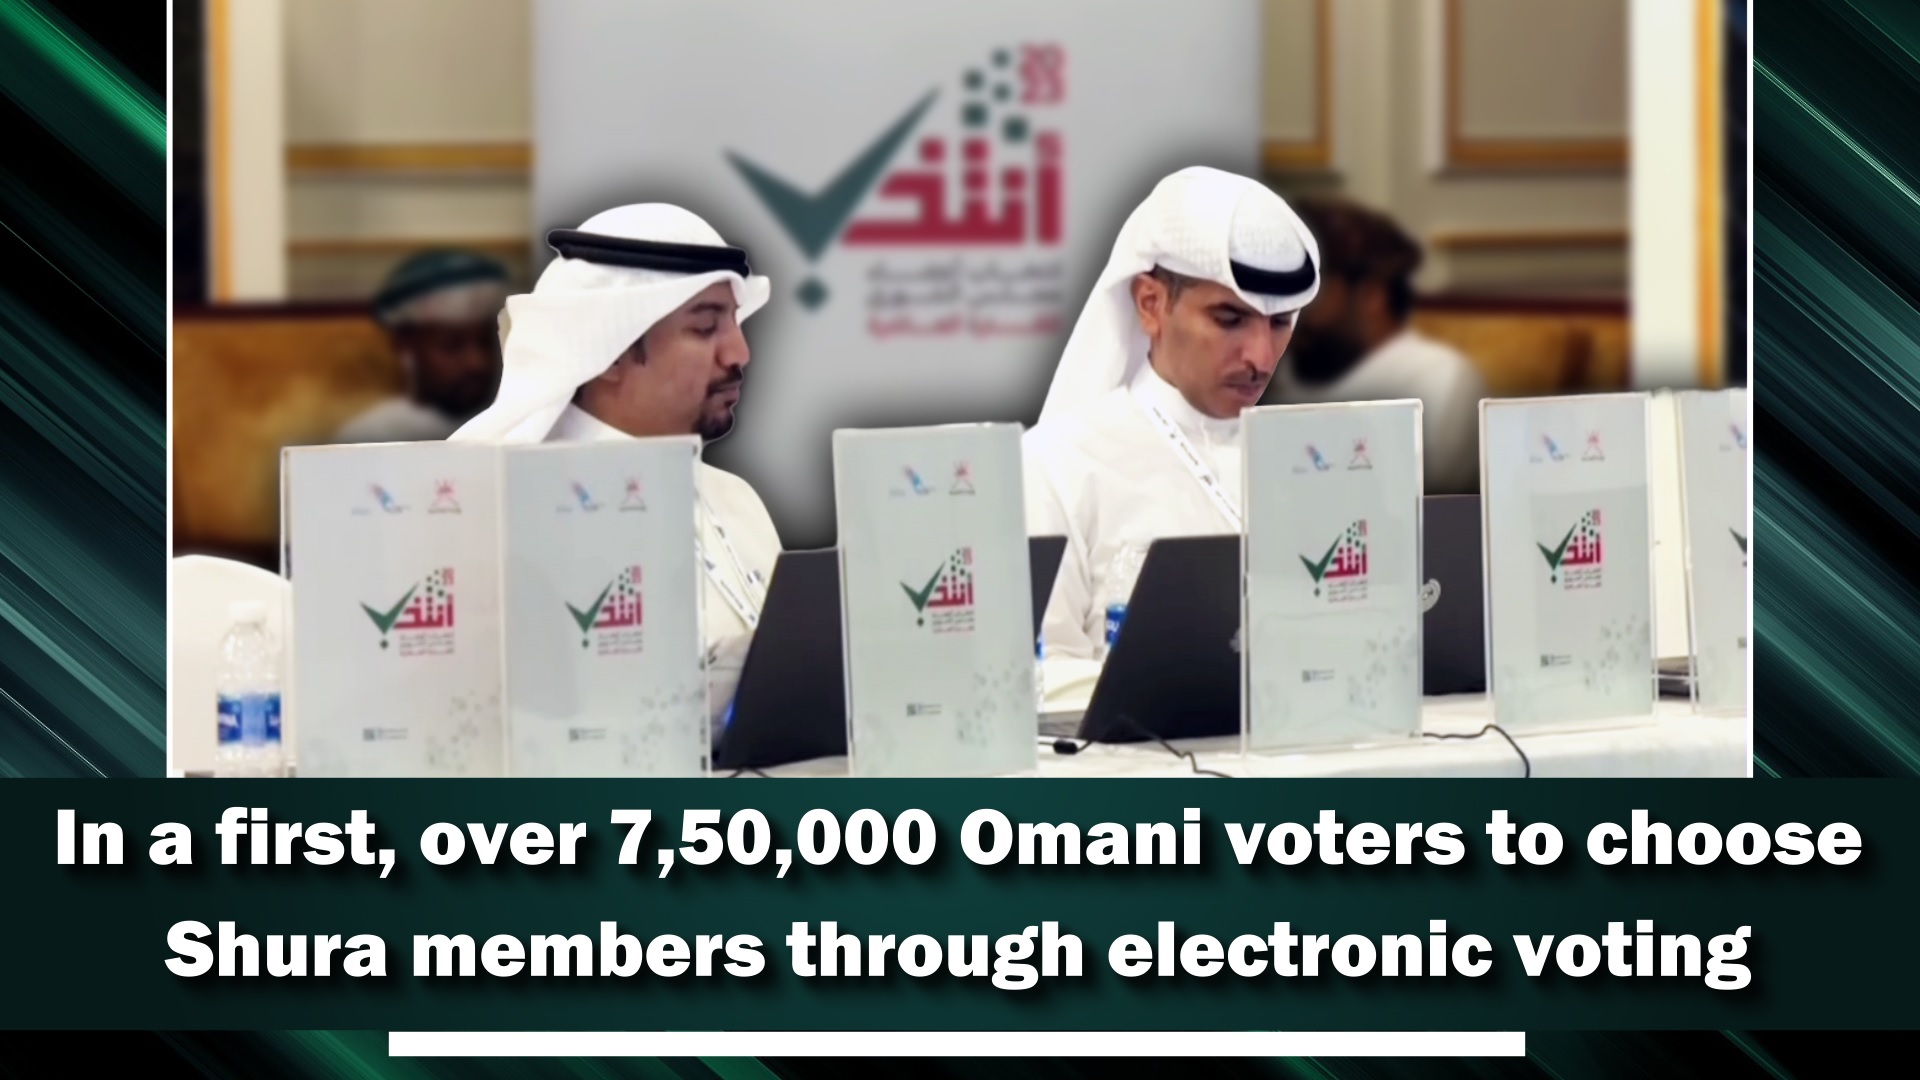 In a first, over 7,50,000 Omani voters to choose Shura members through electronic voting